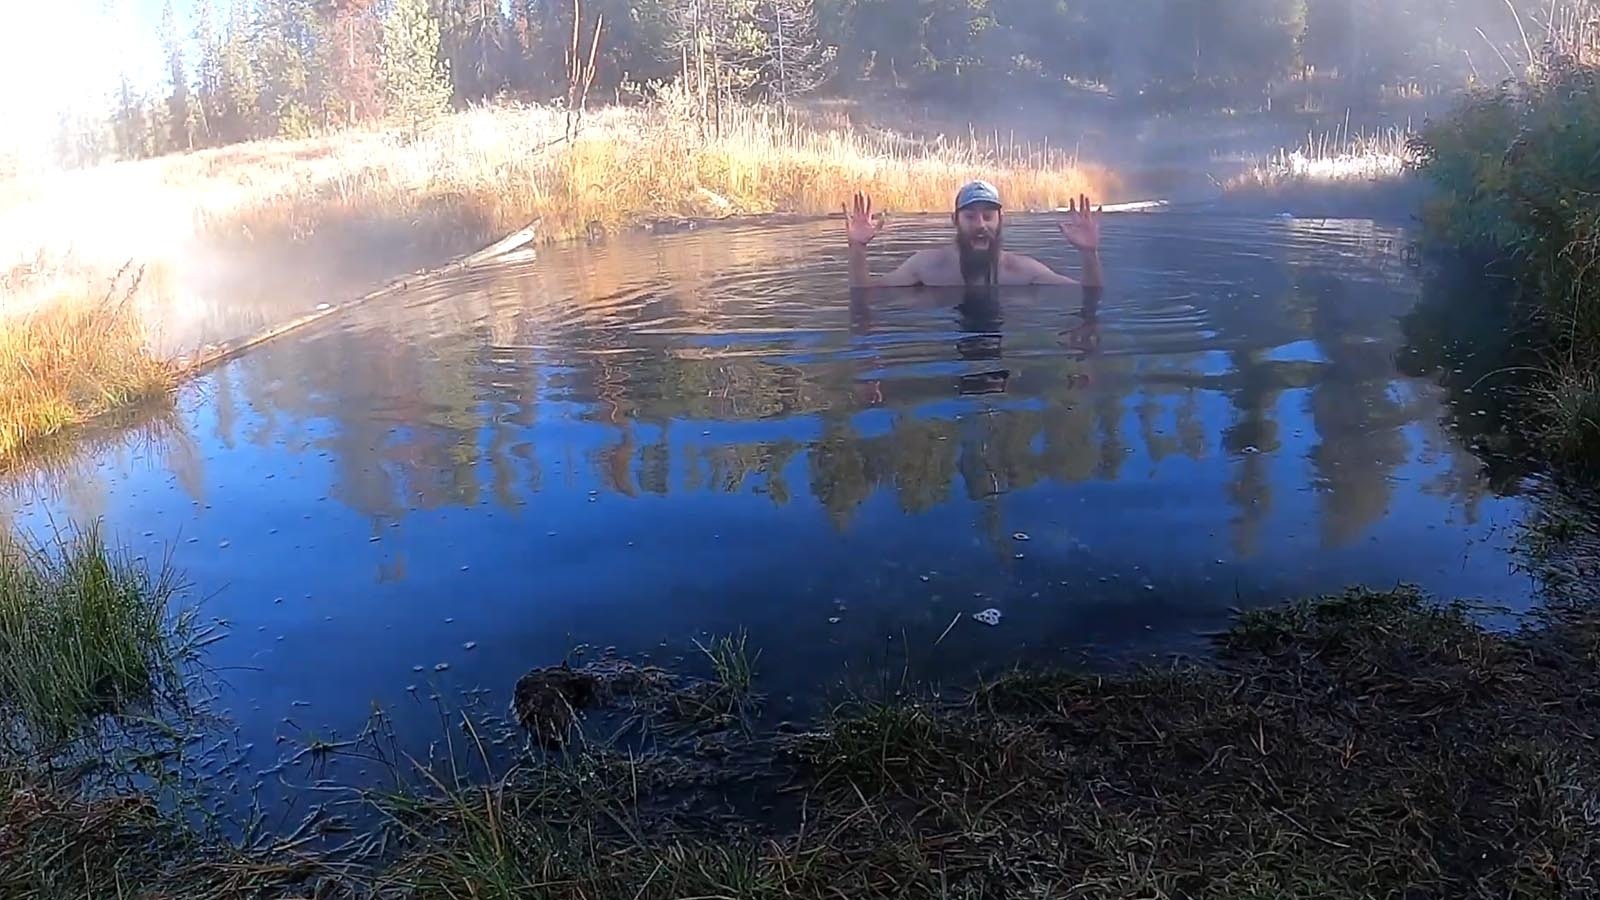 YouTuber Murphy Travels shoots video bathing in Huckleberry Hot Springs in Grand Teton National Park, one of several in the area that's confirmed to contain a deadly brain-eating amoeba.